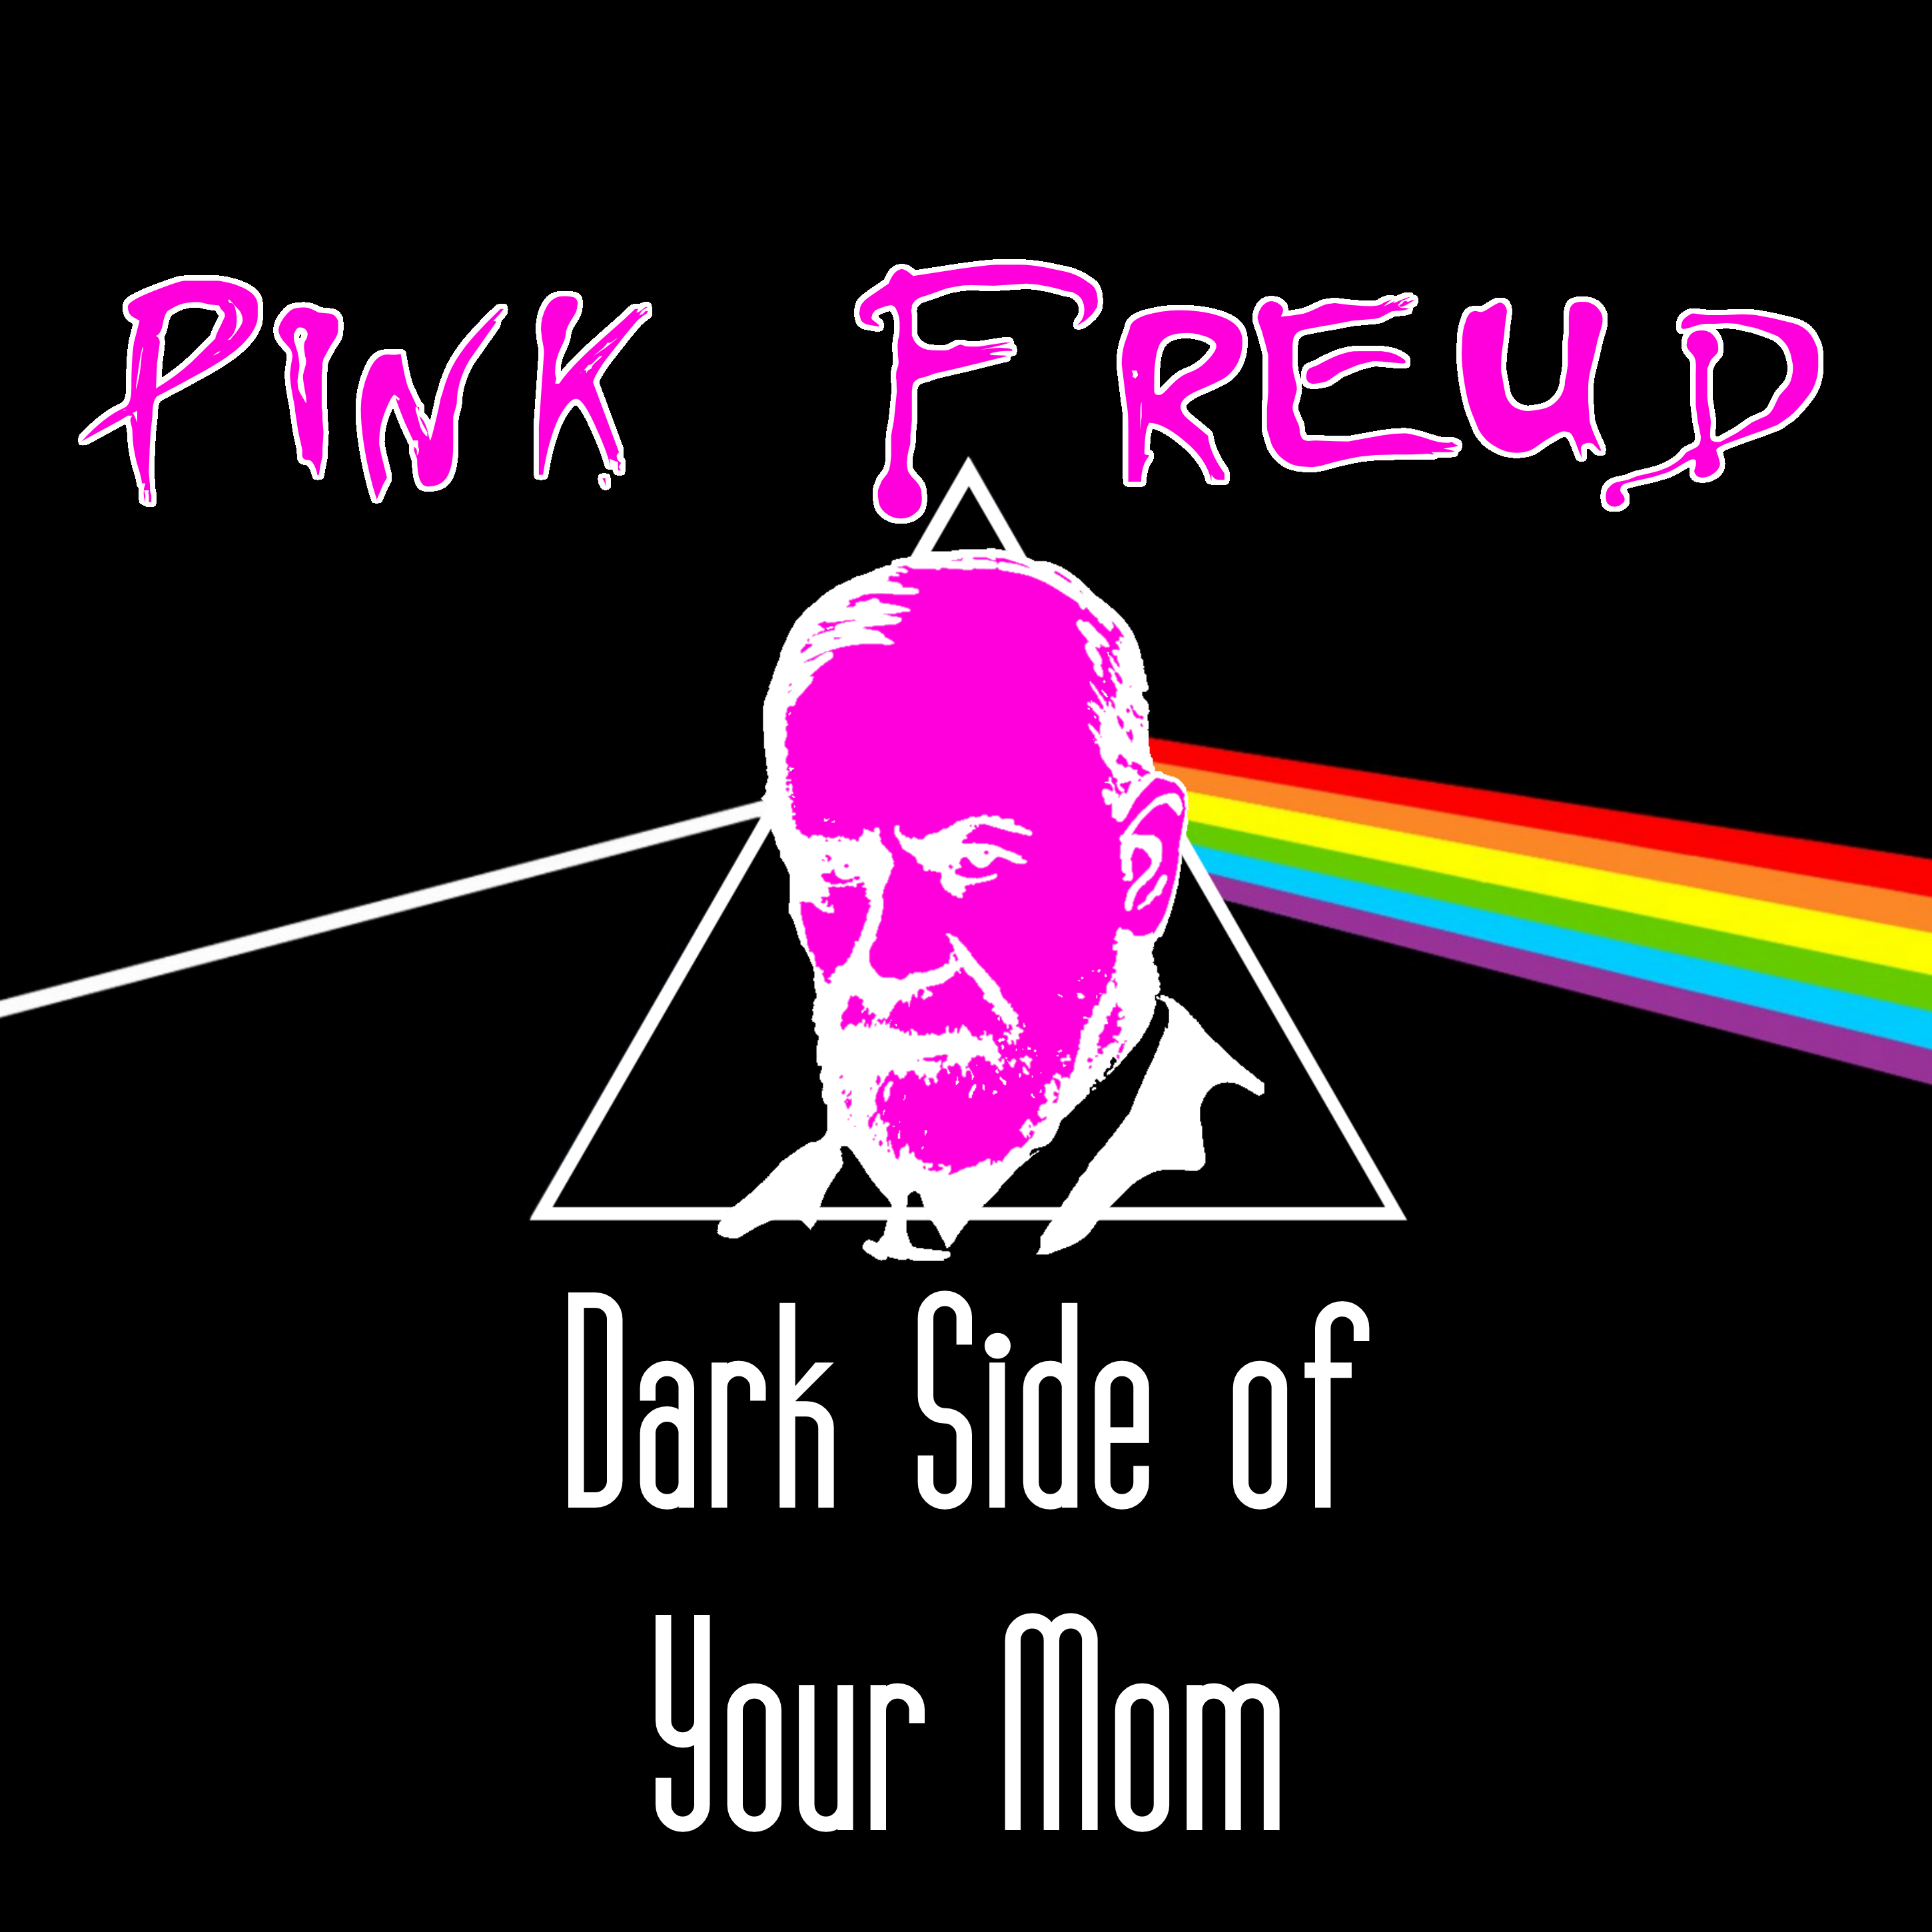 Dark Side of Your Mom